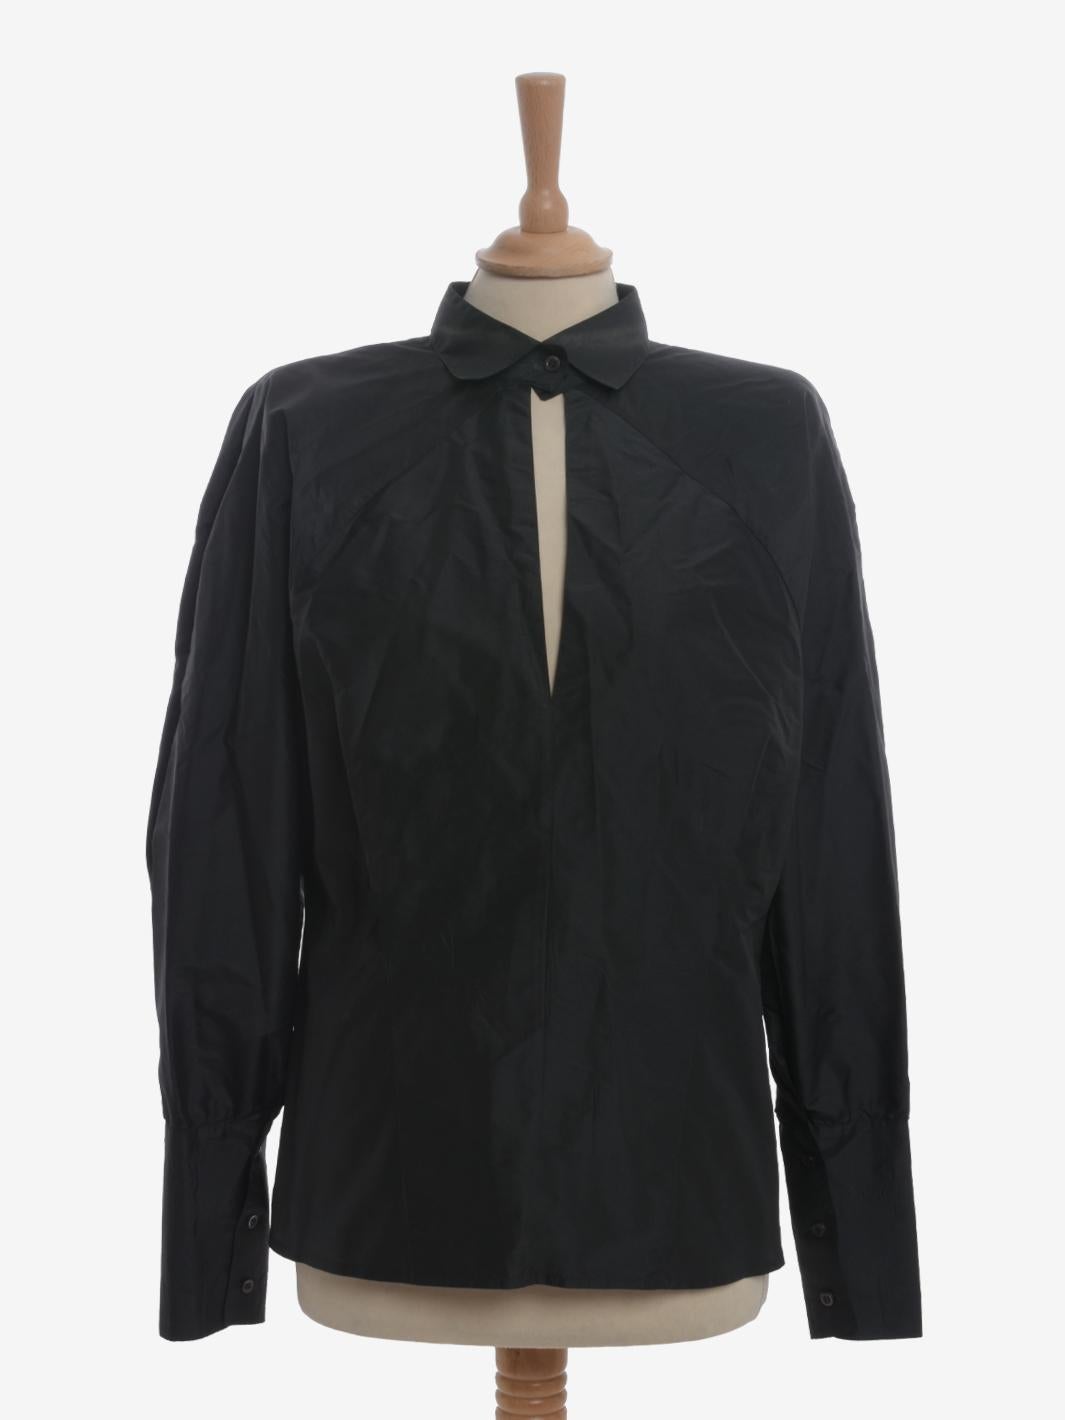 Gianfranco Ferré Cut-out Shirt is a rare garment from ferrè featuring padded shoulder pads and a slouchy cut. the sleeves have adjustable button cuffs and the closure is a single button under the collar. Giving the garment particularity is the